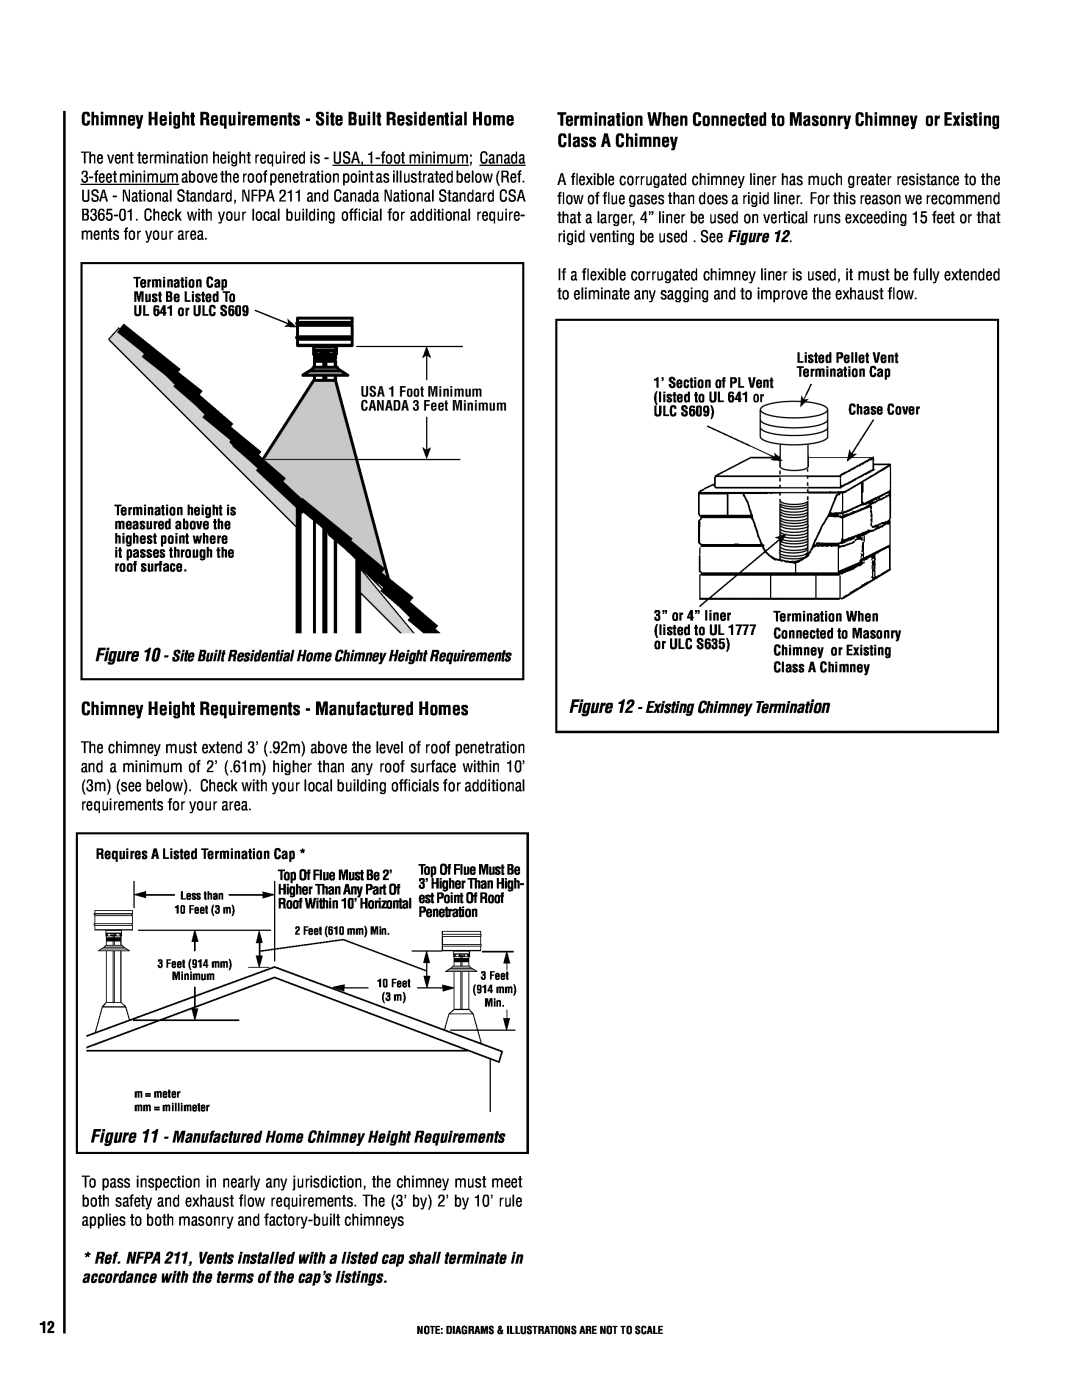 Lennox Hearth 32FS operation manual Chimney Height Requirements - Manufactured Homes, Existing Chimney Termination 